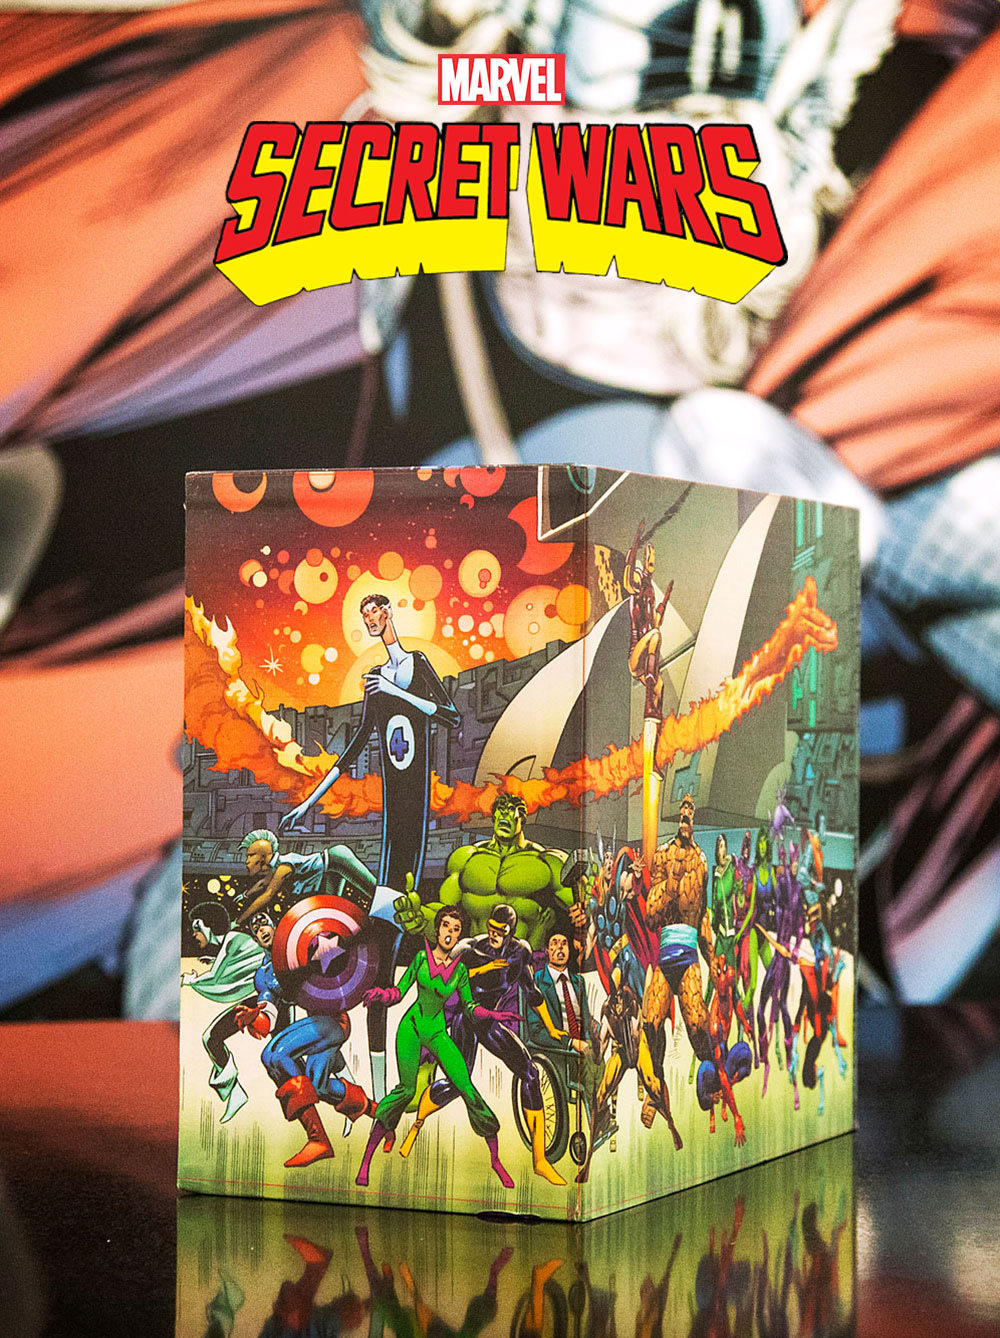 MARVEL SUPER HEROES SECRET WARS Collection to be Released in Box Set